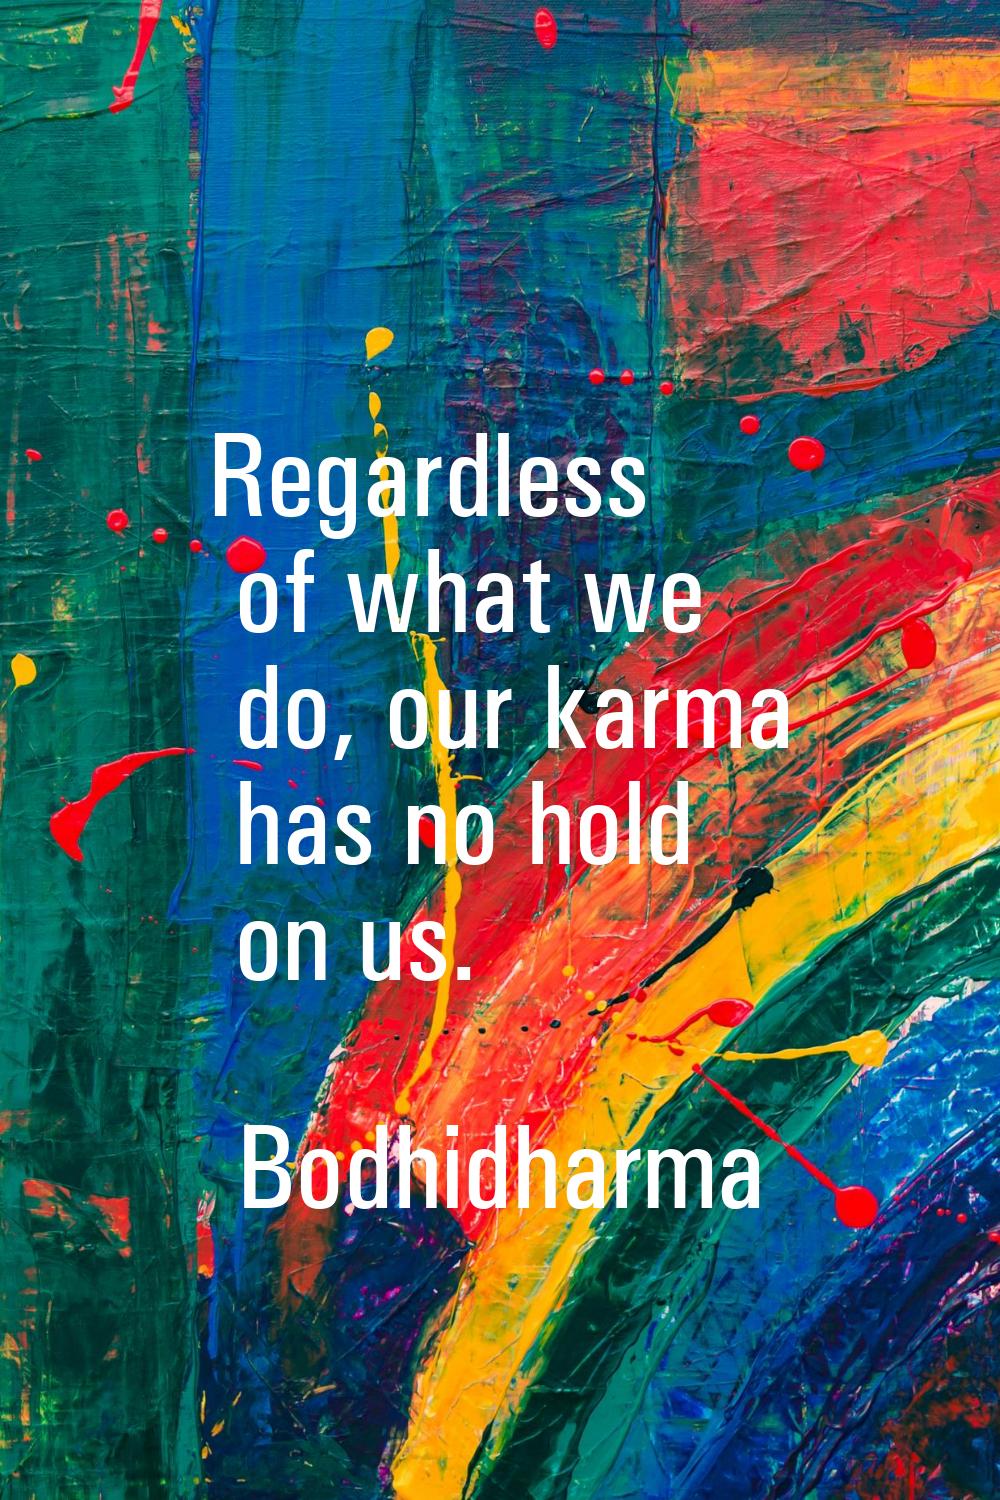 Regardless of what we do, our karma has no hold on us.